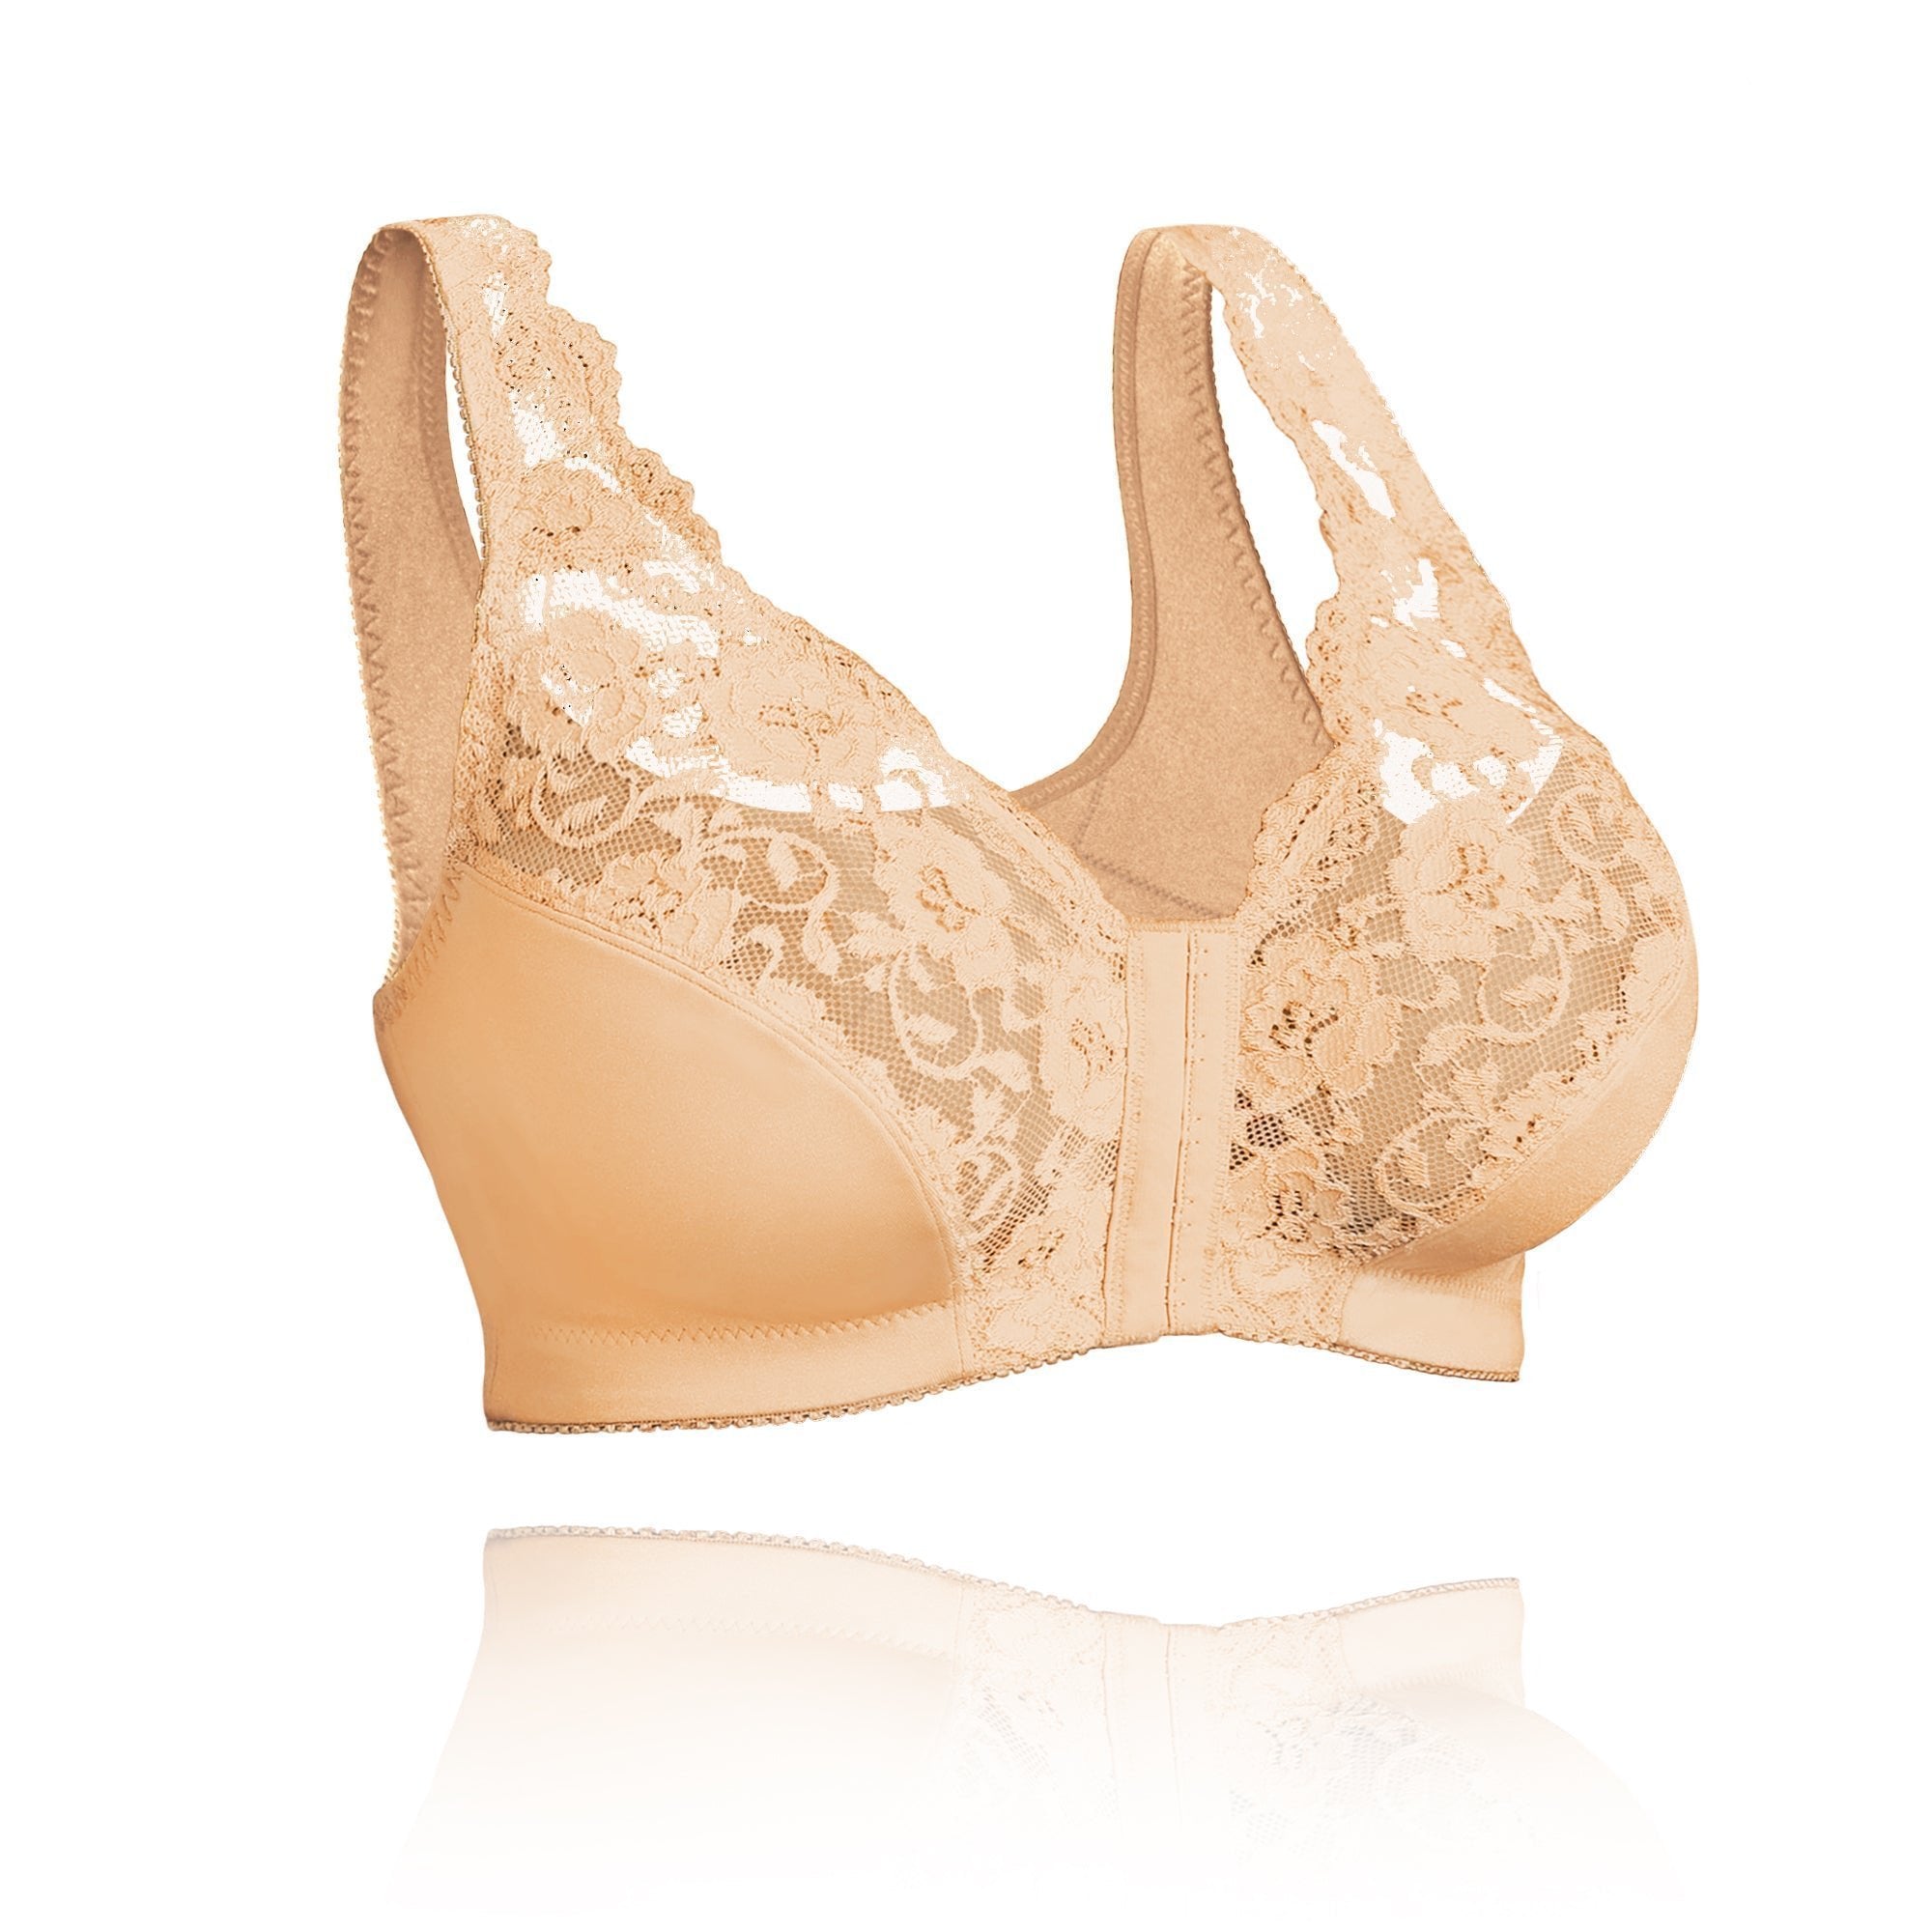 SENIORSBRA®WOMEN'S 18-HOUR Front Hooks, Stretch-Lace, Super-Lift And Posture Correction-ALL IN ONE BRA(BUY 1 GET 1 FREE) -Beige